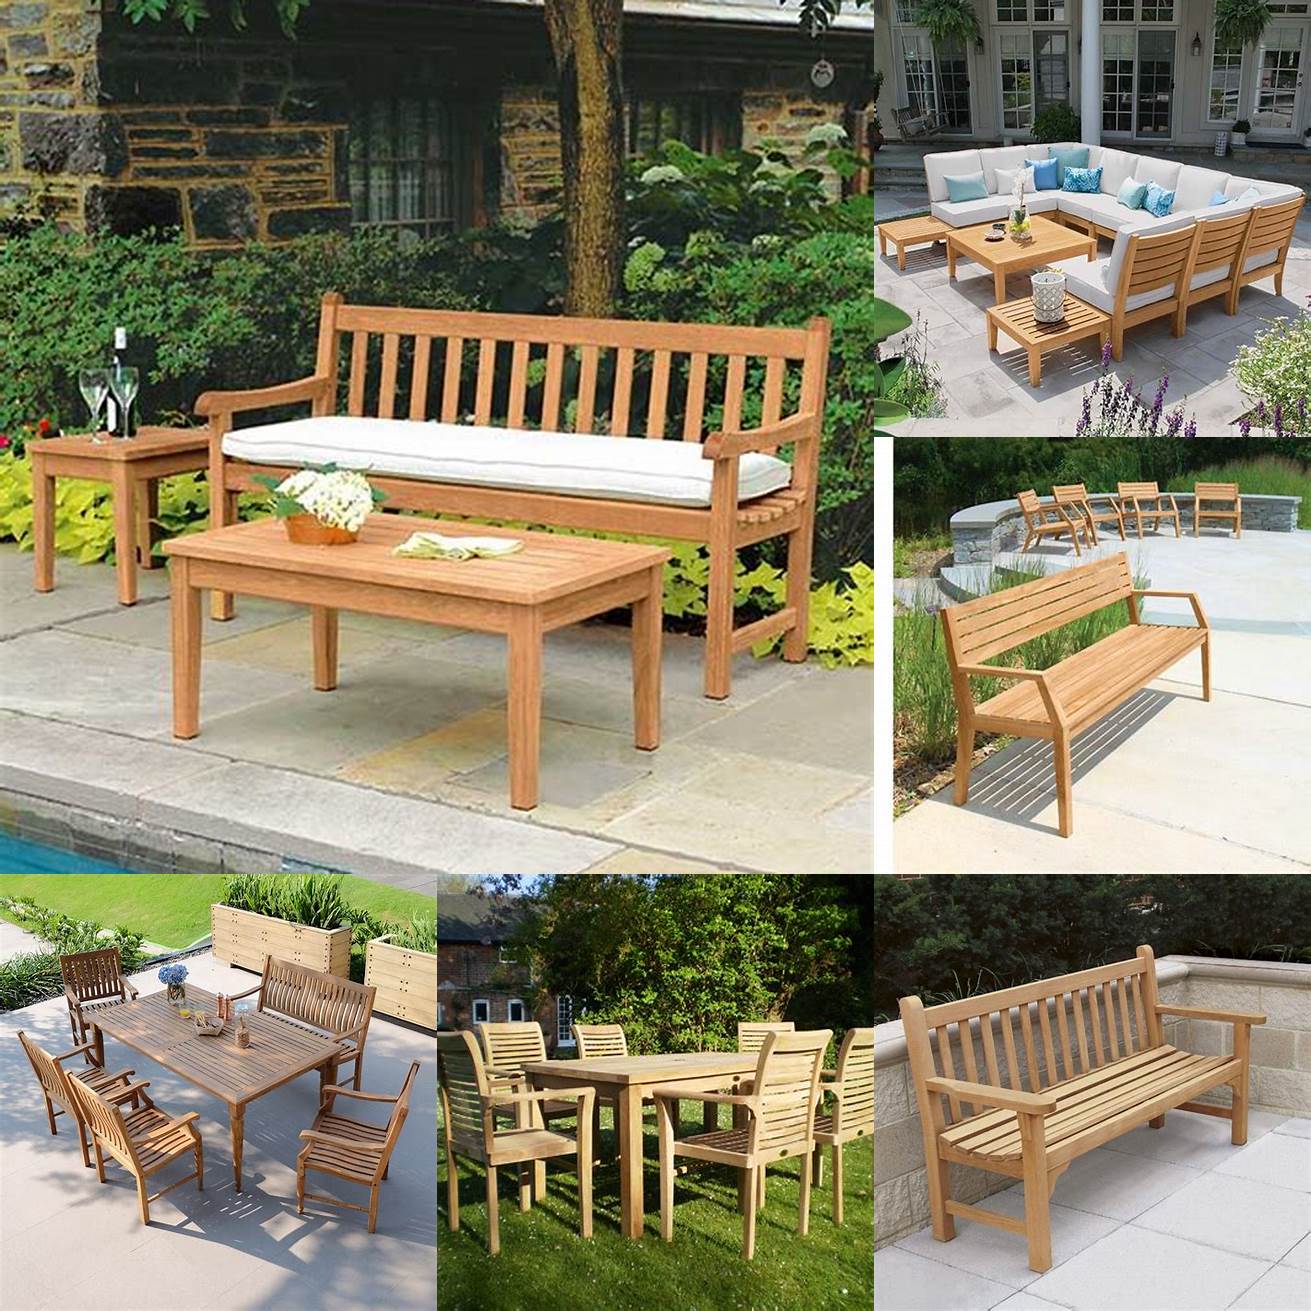 Country Casual Teak Furniture in a garden